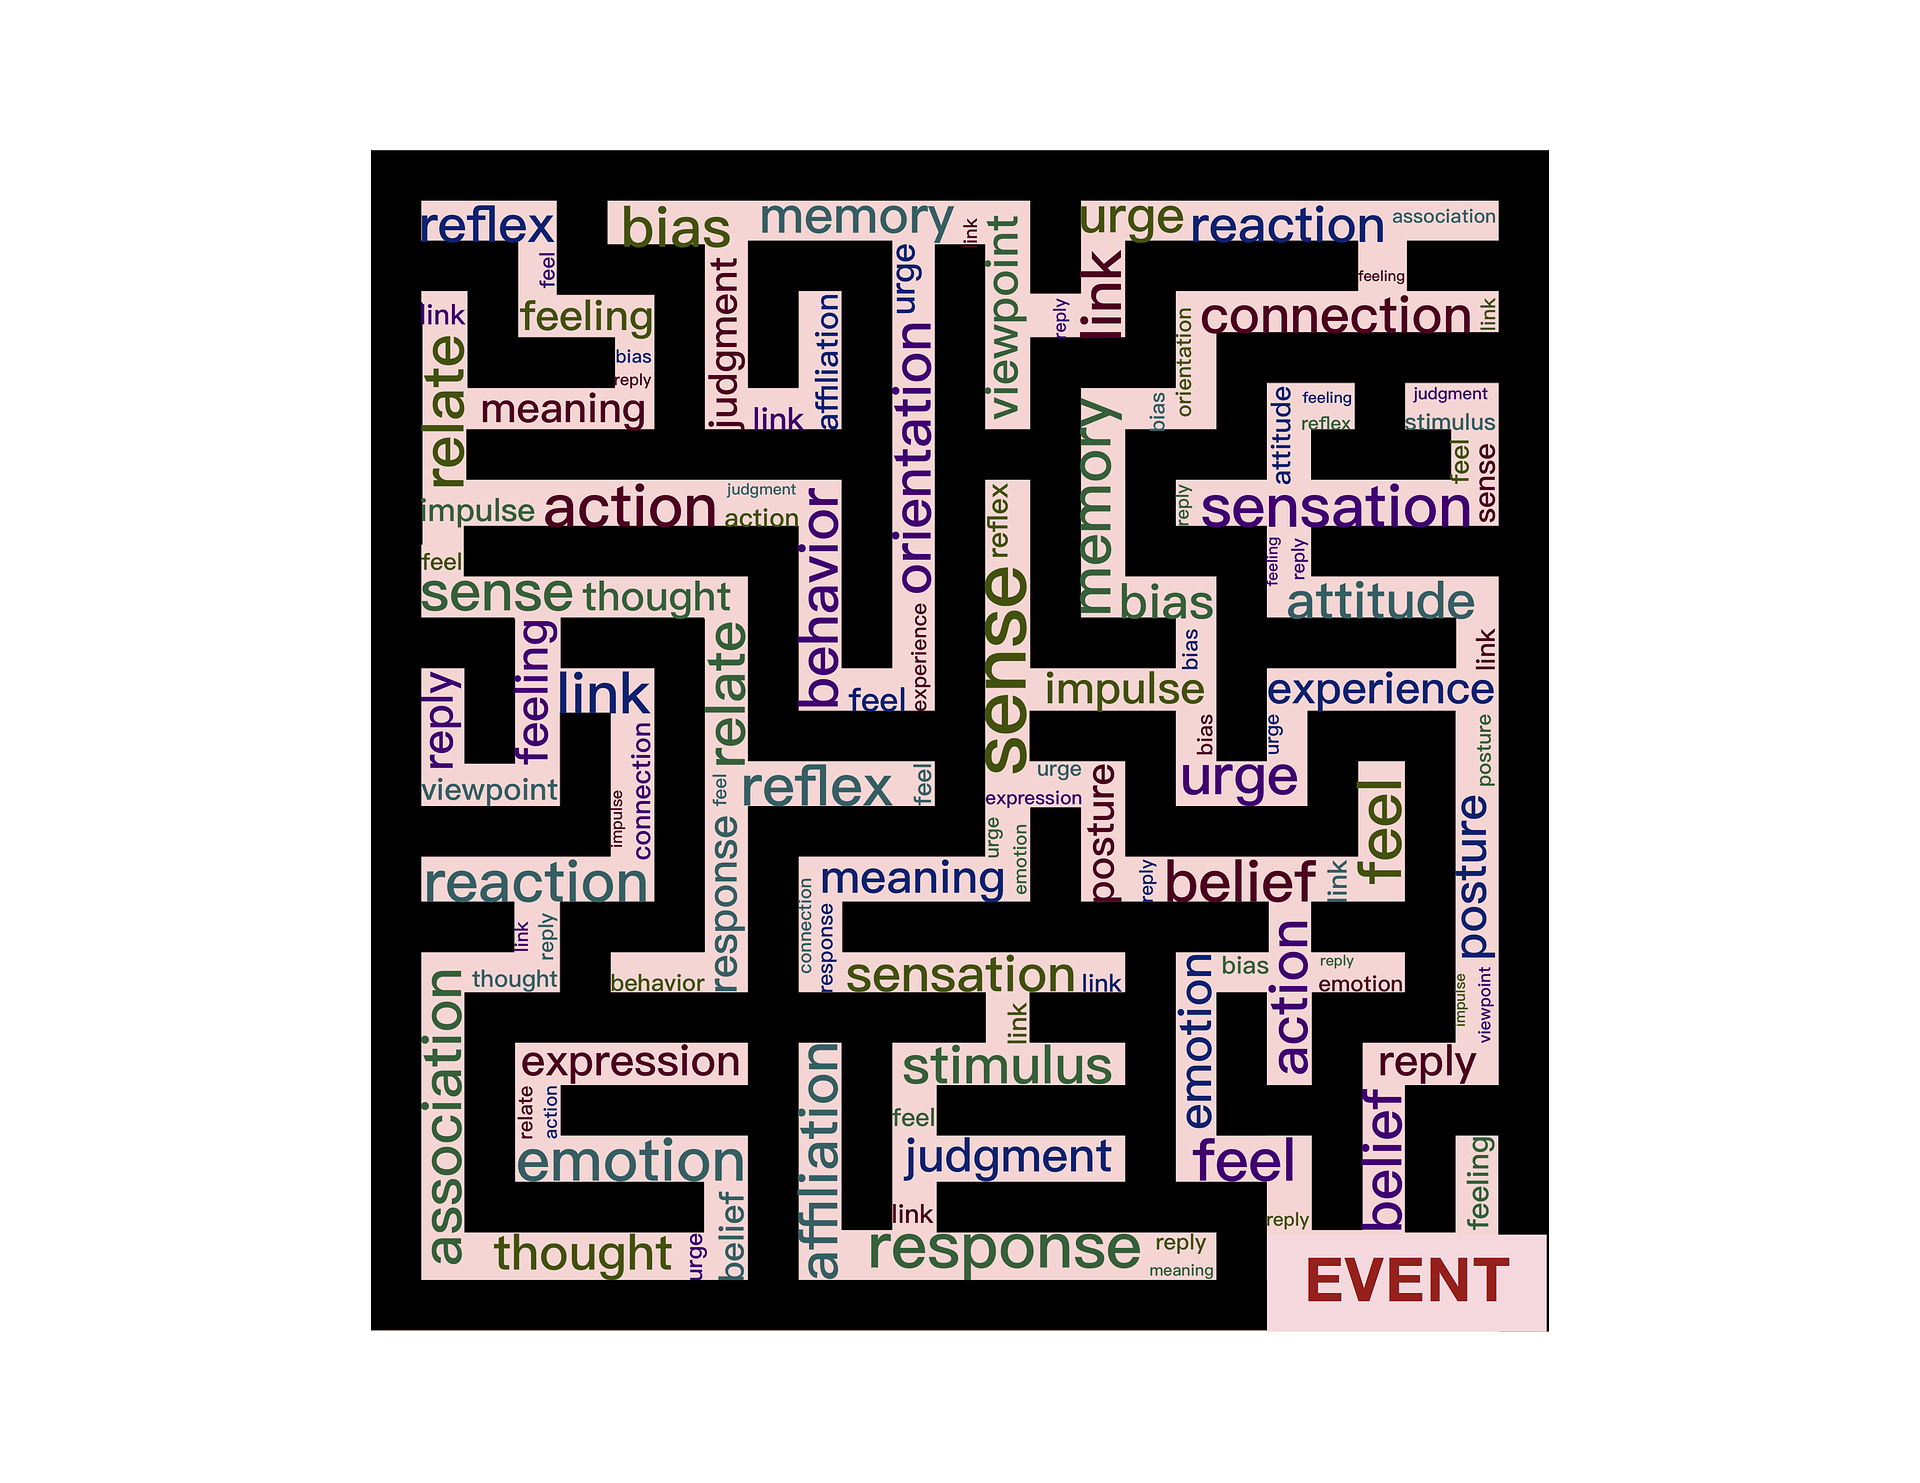 Image of a maze on a black background with each branch of the maze showing different words such as "response, meaning, bias, memory." credit: Image by John Hain from Pixabay